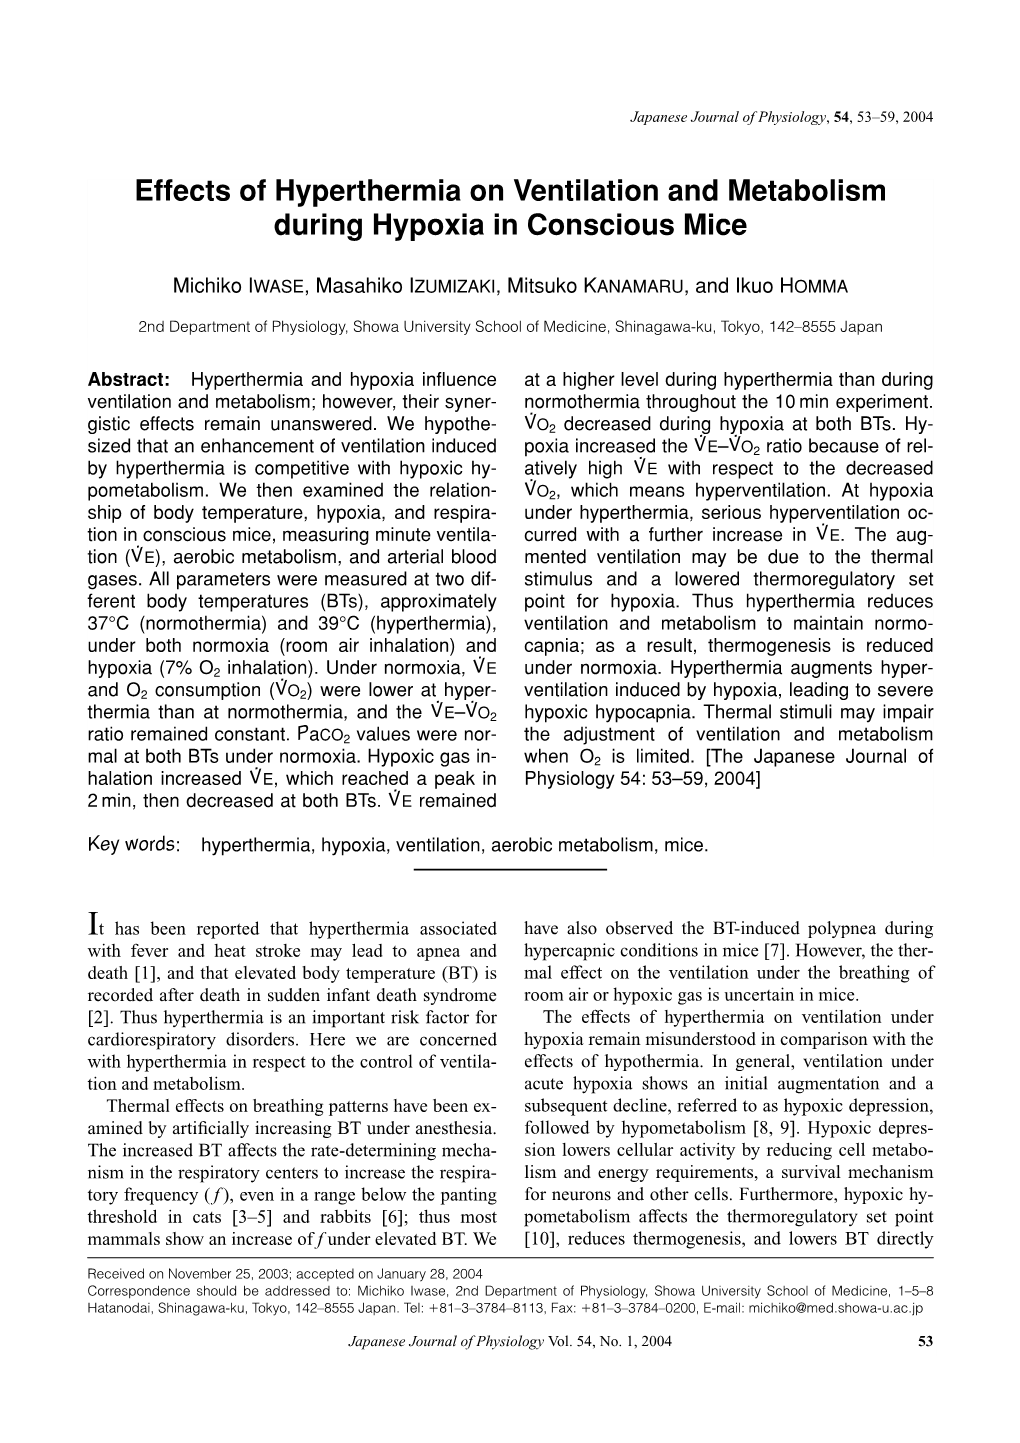 Effects of Hyperthermia on Ventilation and Metabolism During Hypoxia in Conscious Mice